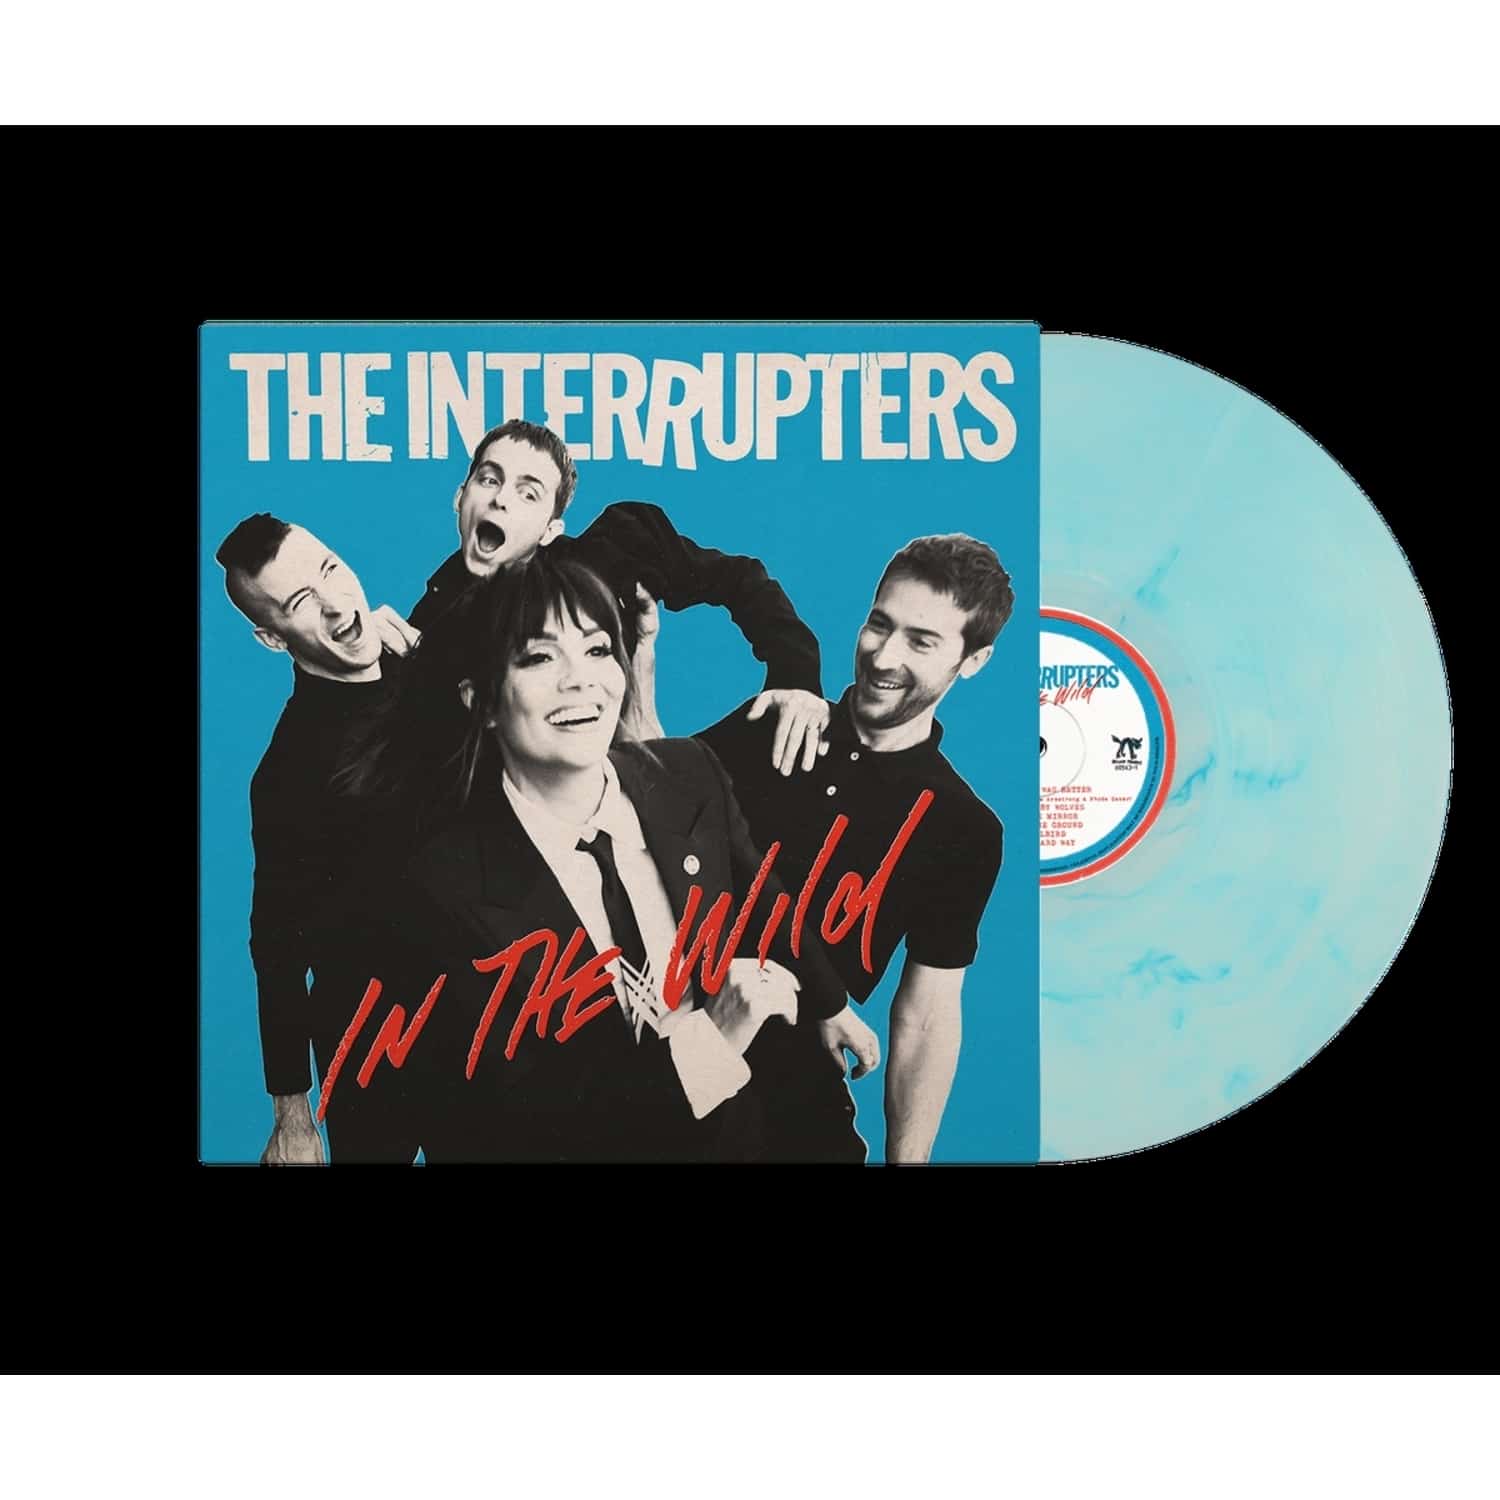 The Interrupters - IN THE WILD 